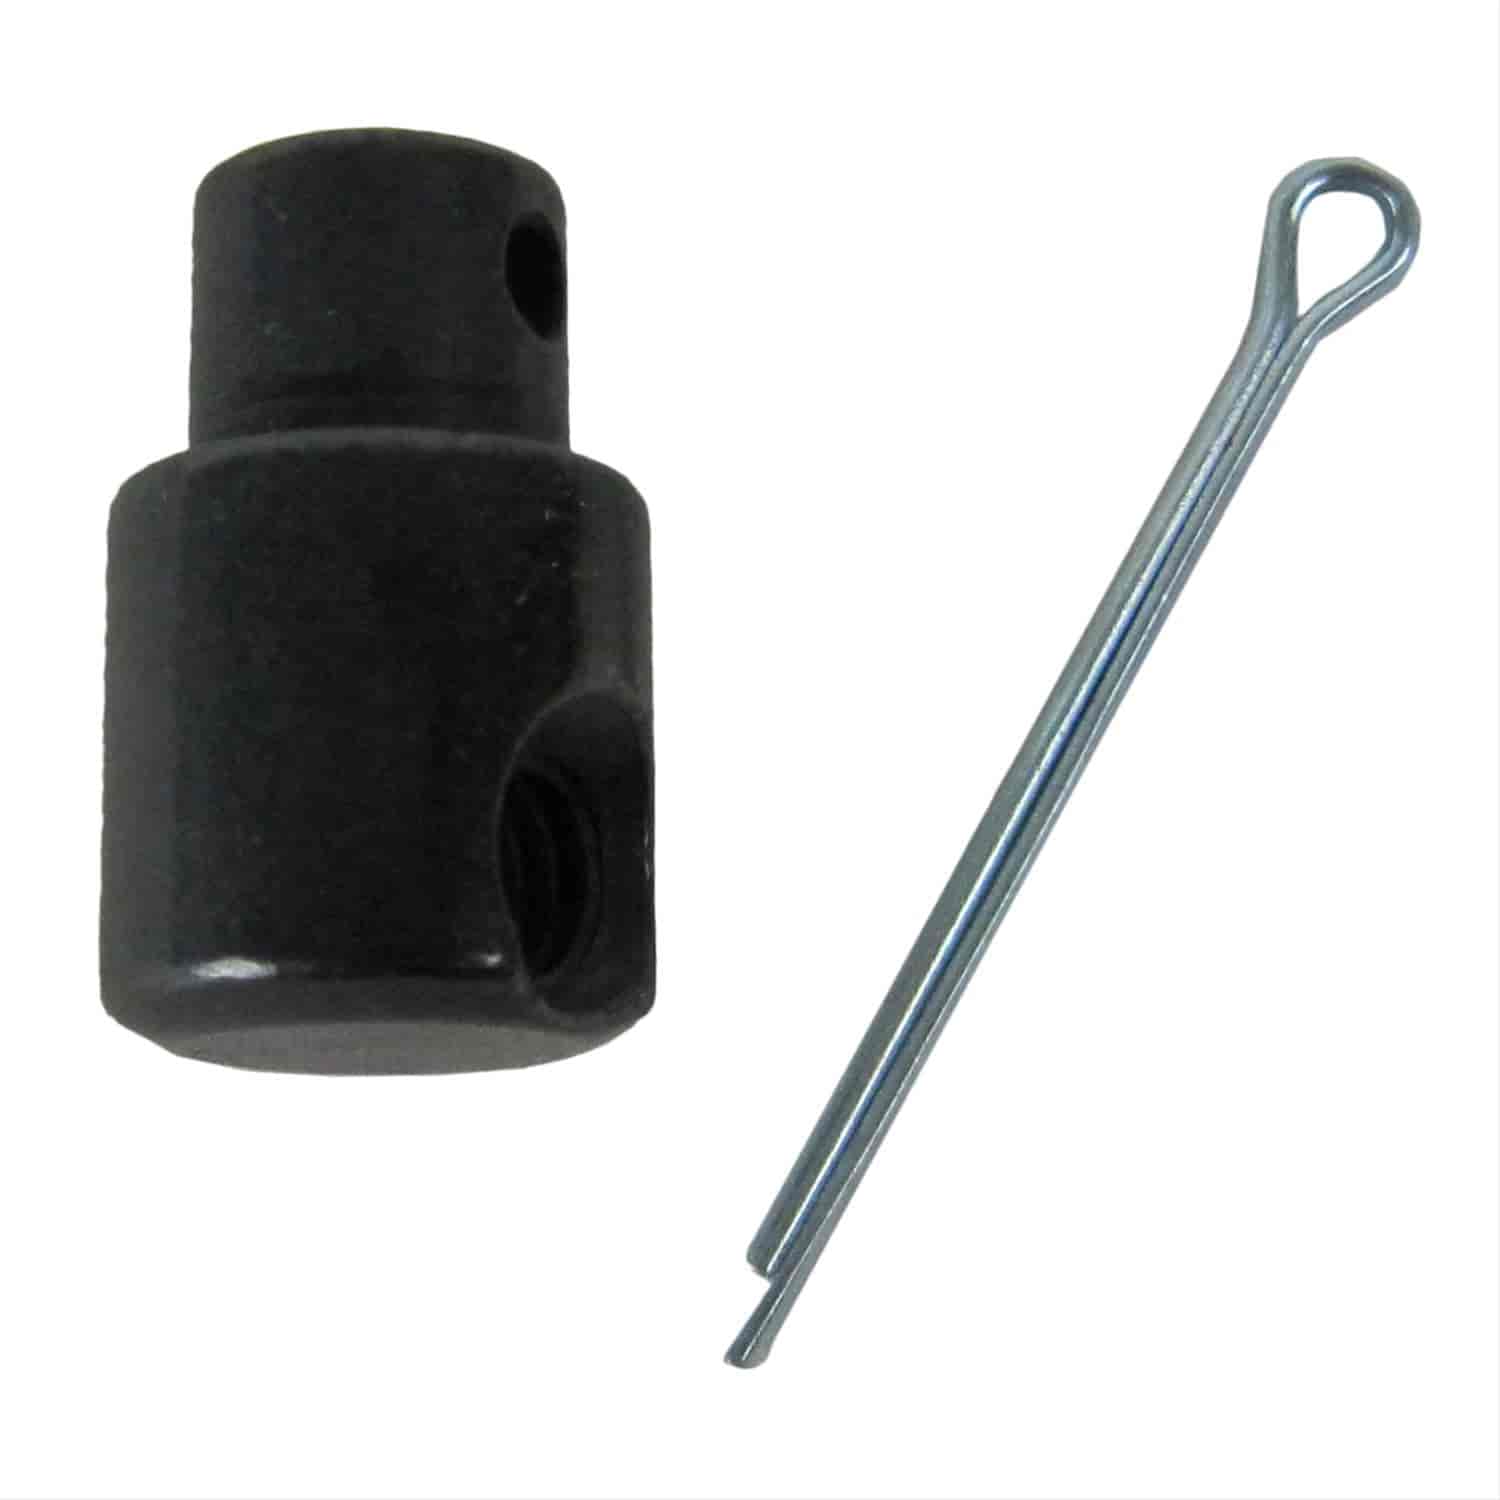 Replacement Automatic Shifter Linkage Swivel and Pin For Use With All B&M Levers